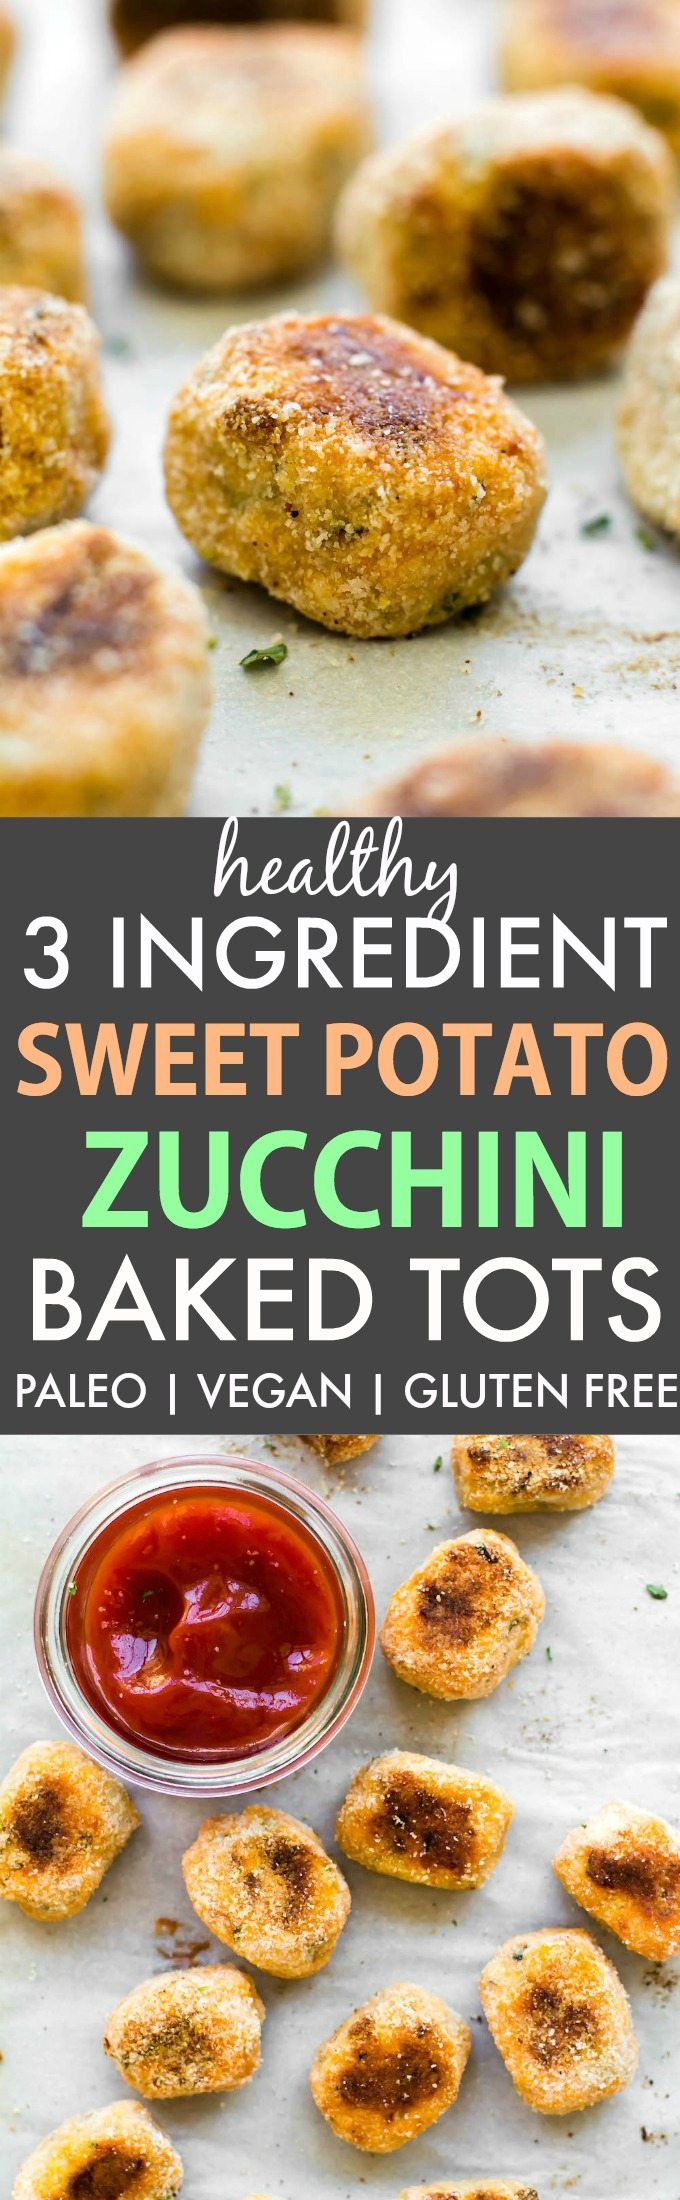 Gluten Free Dessert Recipes With Normal Ingredients
 Healthy 3 Ingre nt Baked Sweet Potato Zucchini Tots